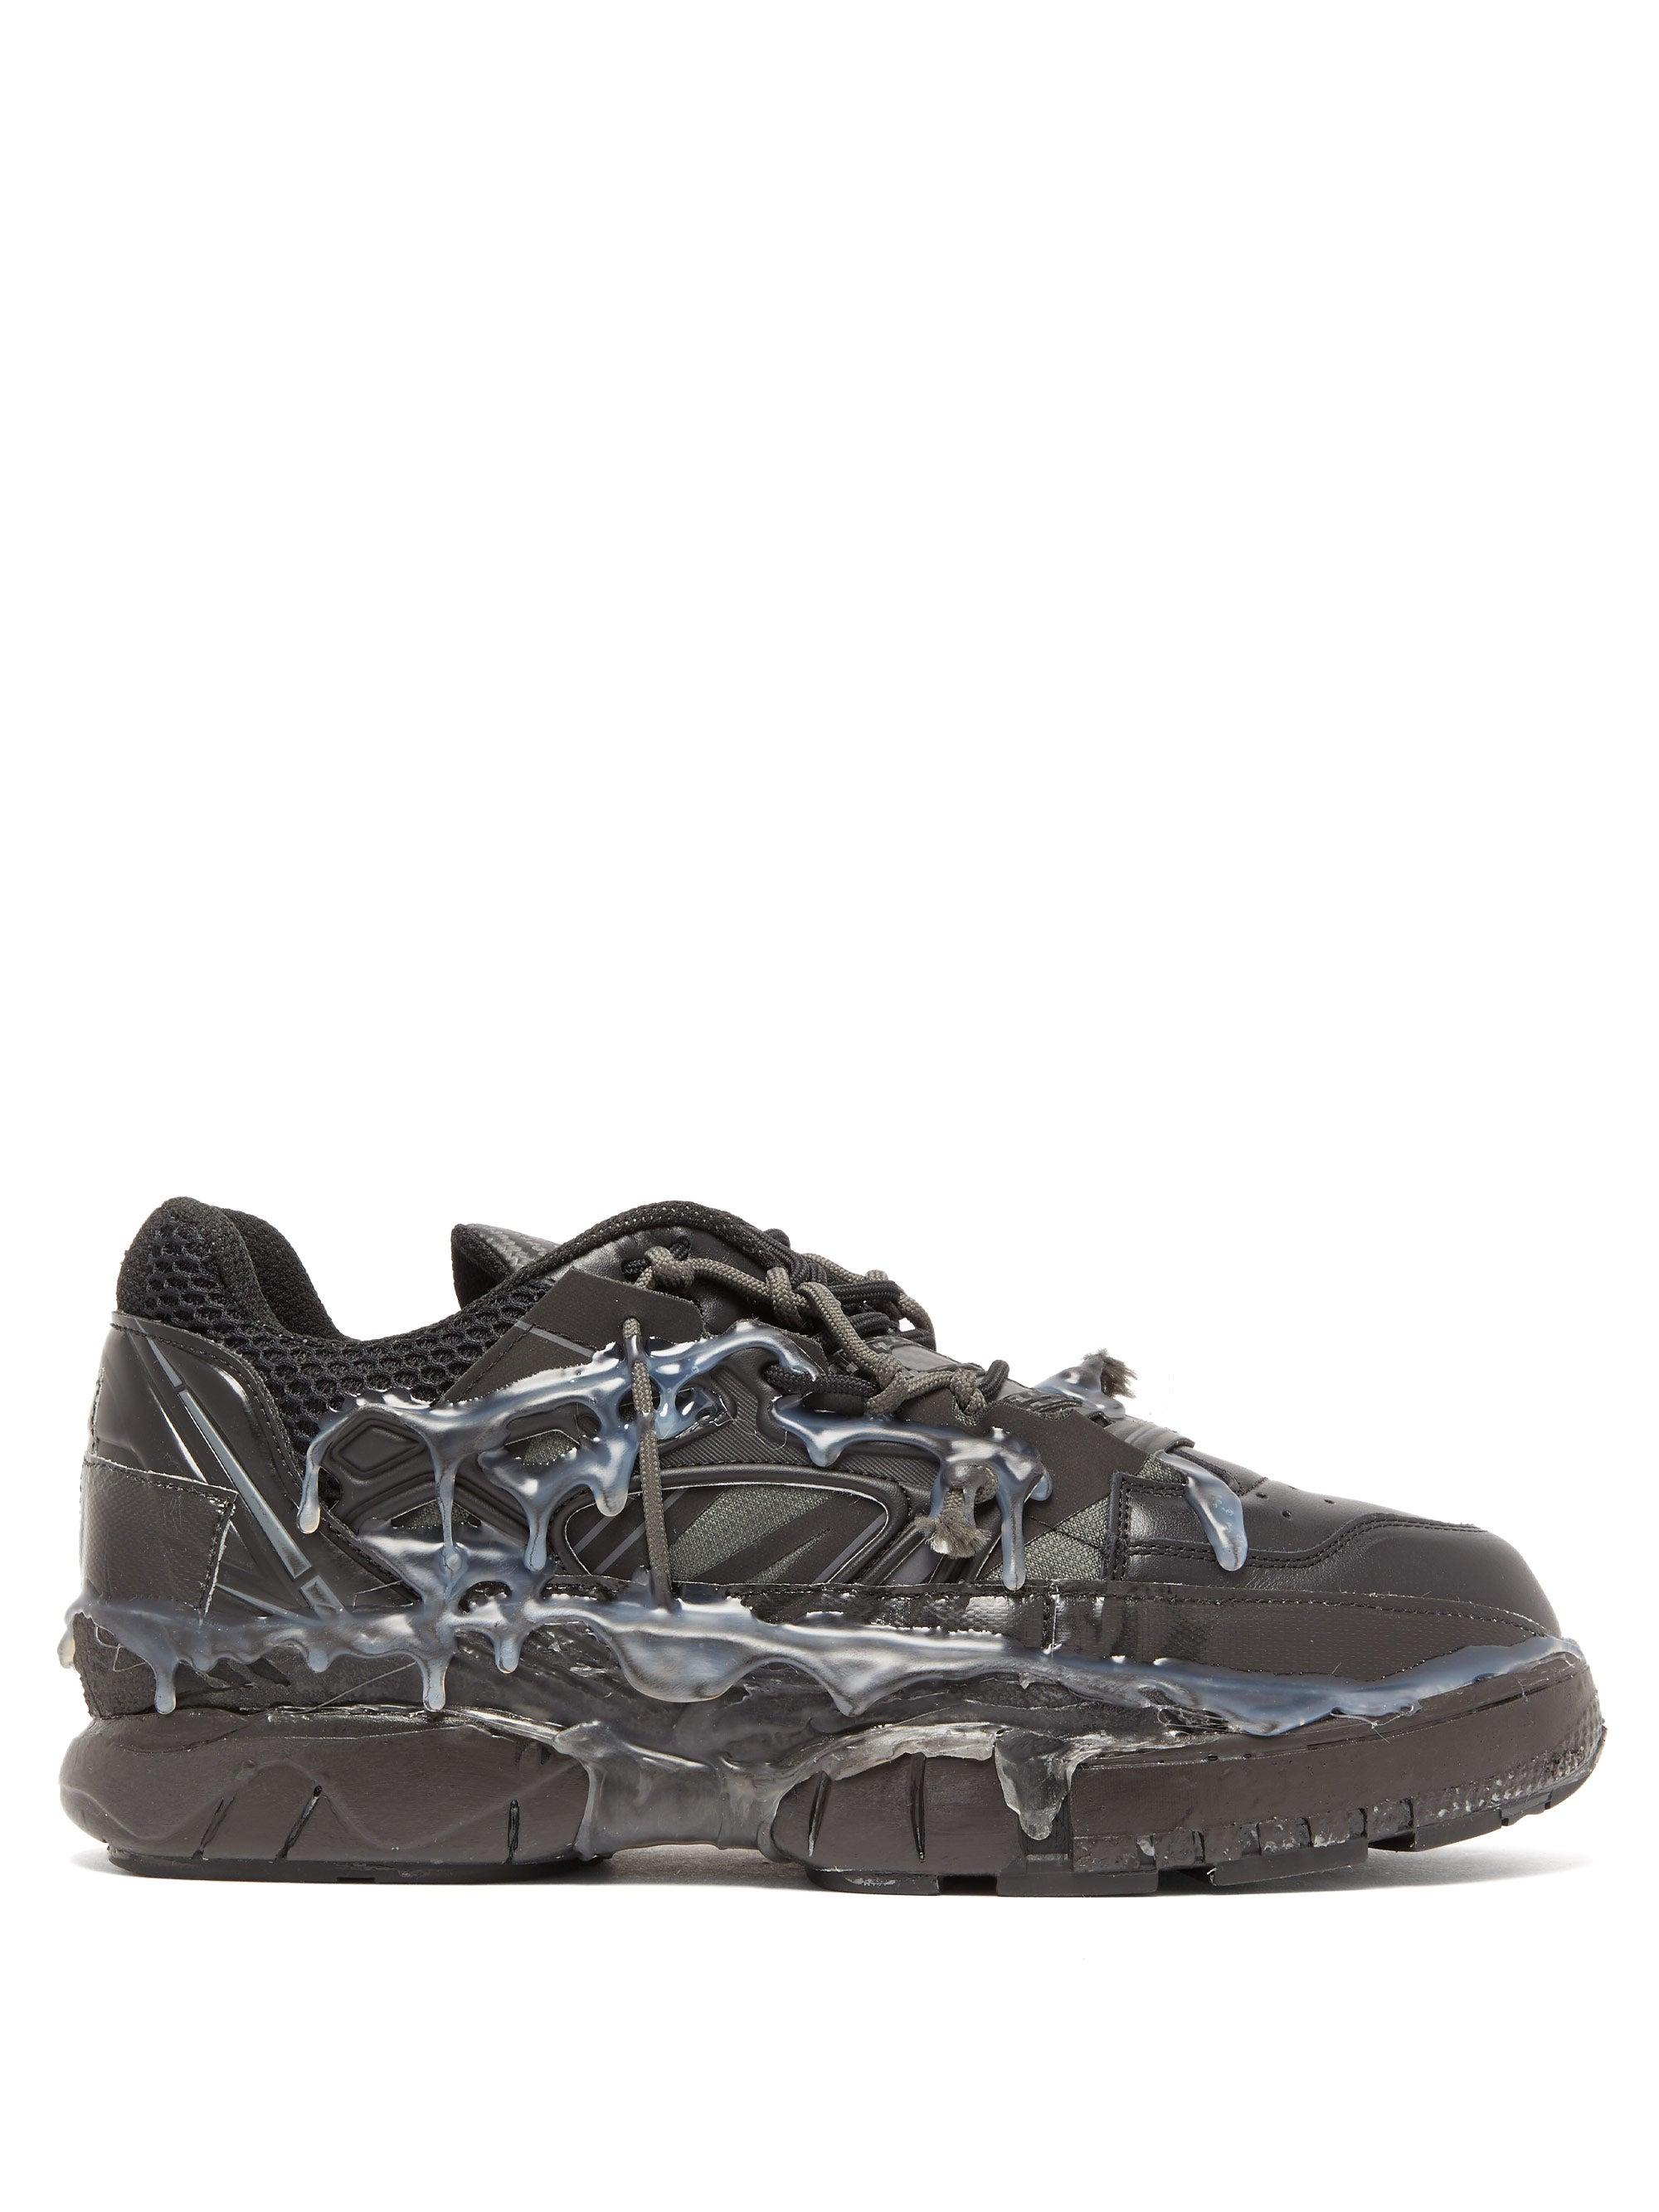 Maison Margiela Leather And Mesh Trainers in Black for Lyst